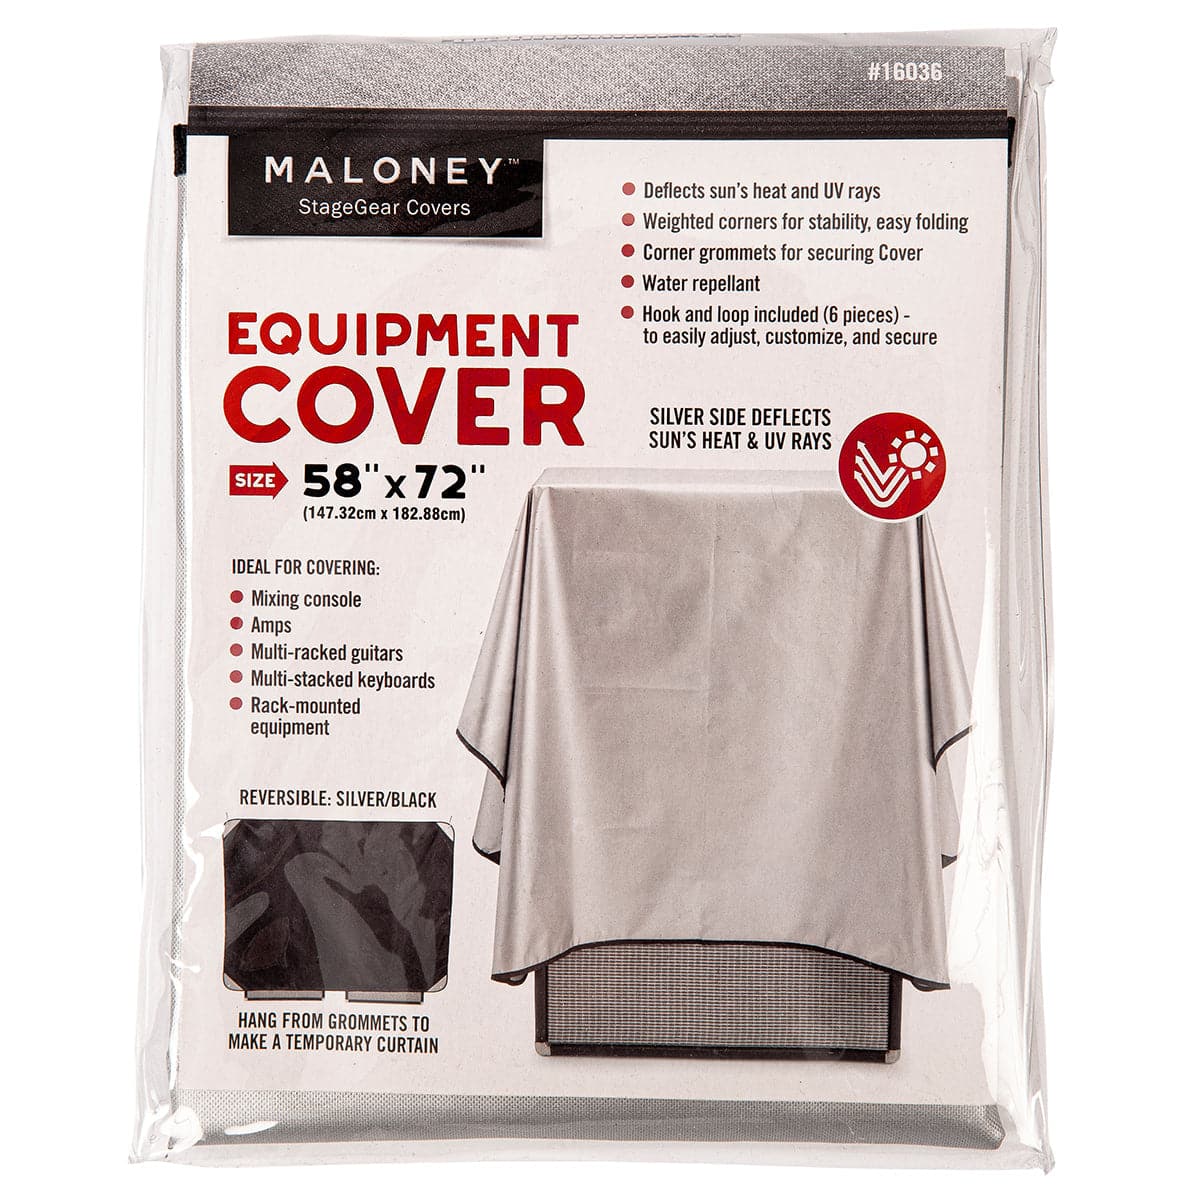 Maloney StageGear Cover ~ Equipment